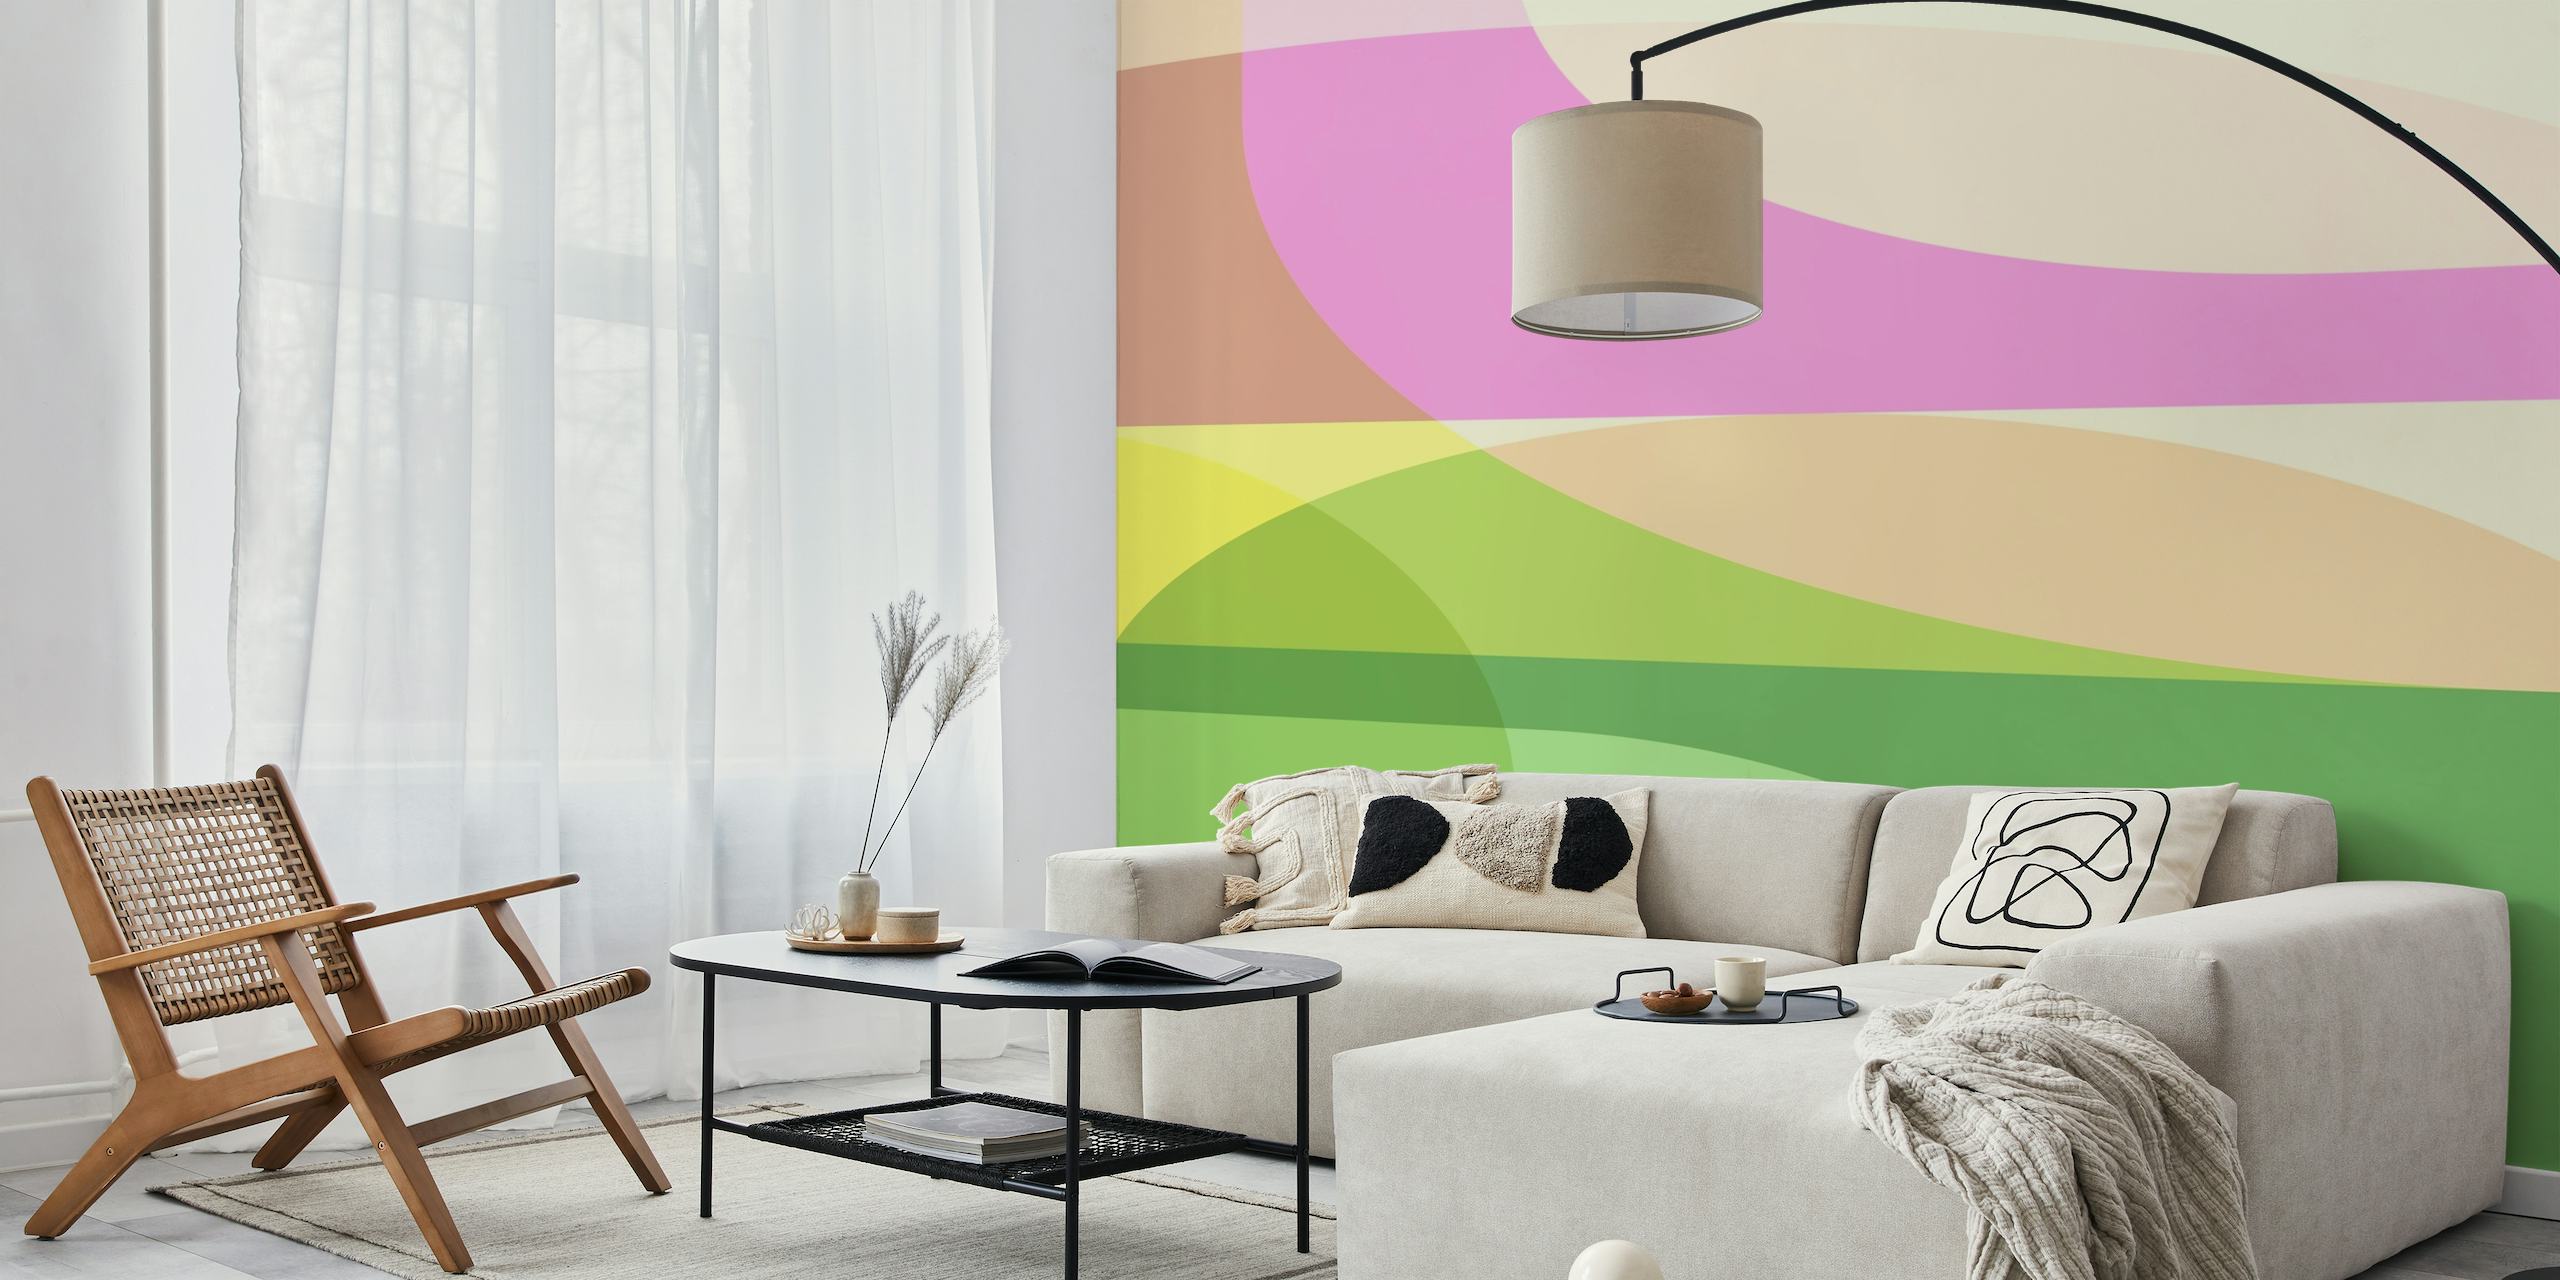 Abstract geometric shapes wall mural in shades of pink and green